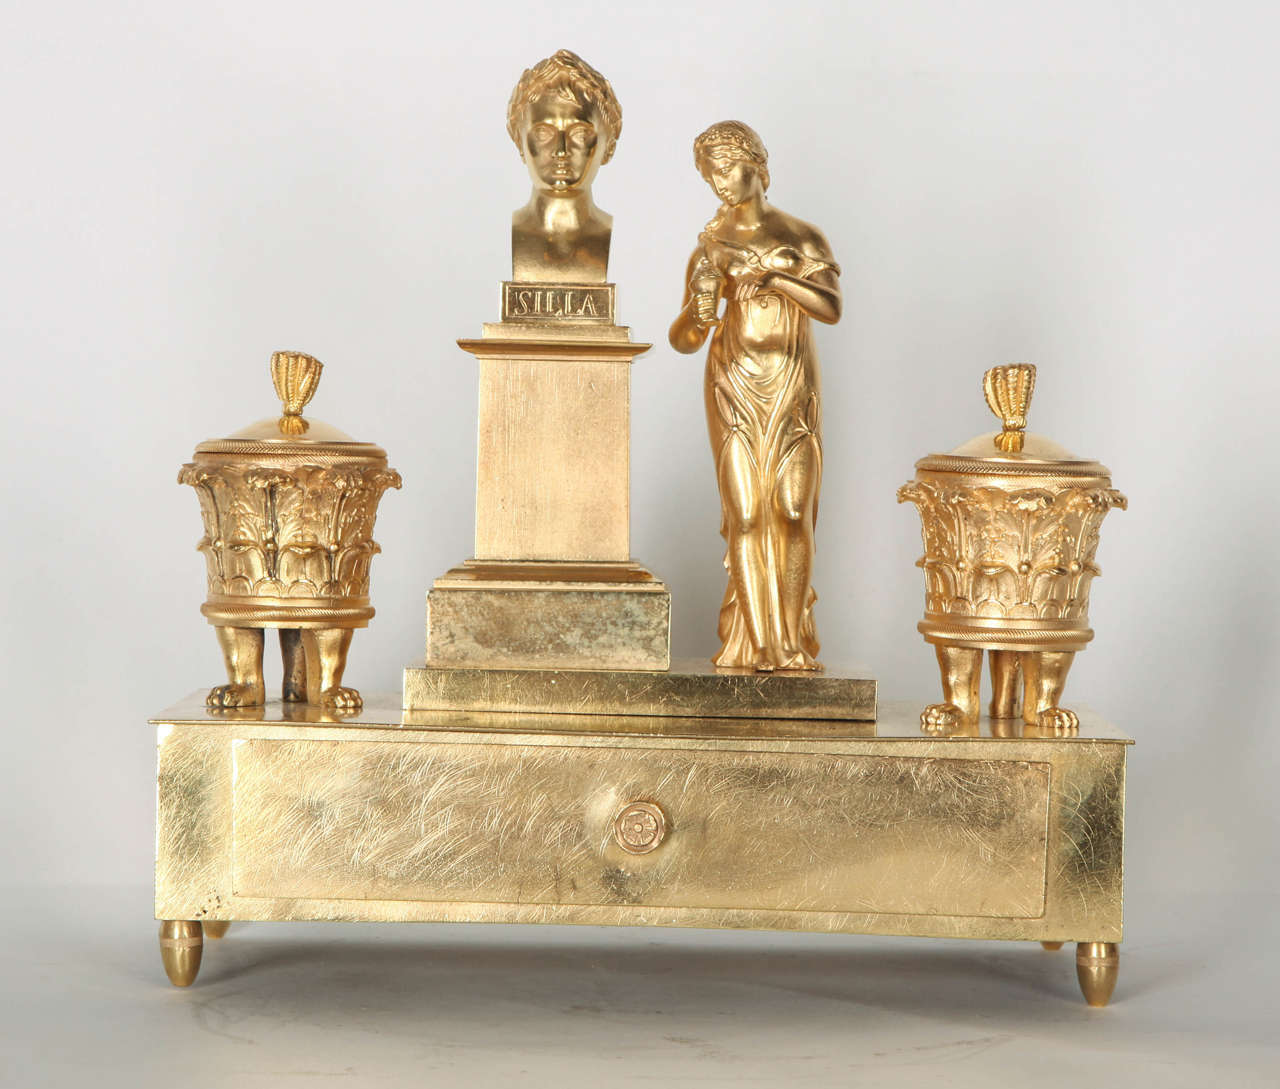 A small gilded bronze inkwell, France, late 19th century.